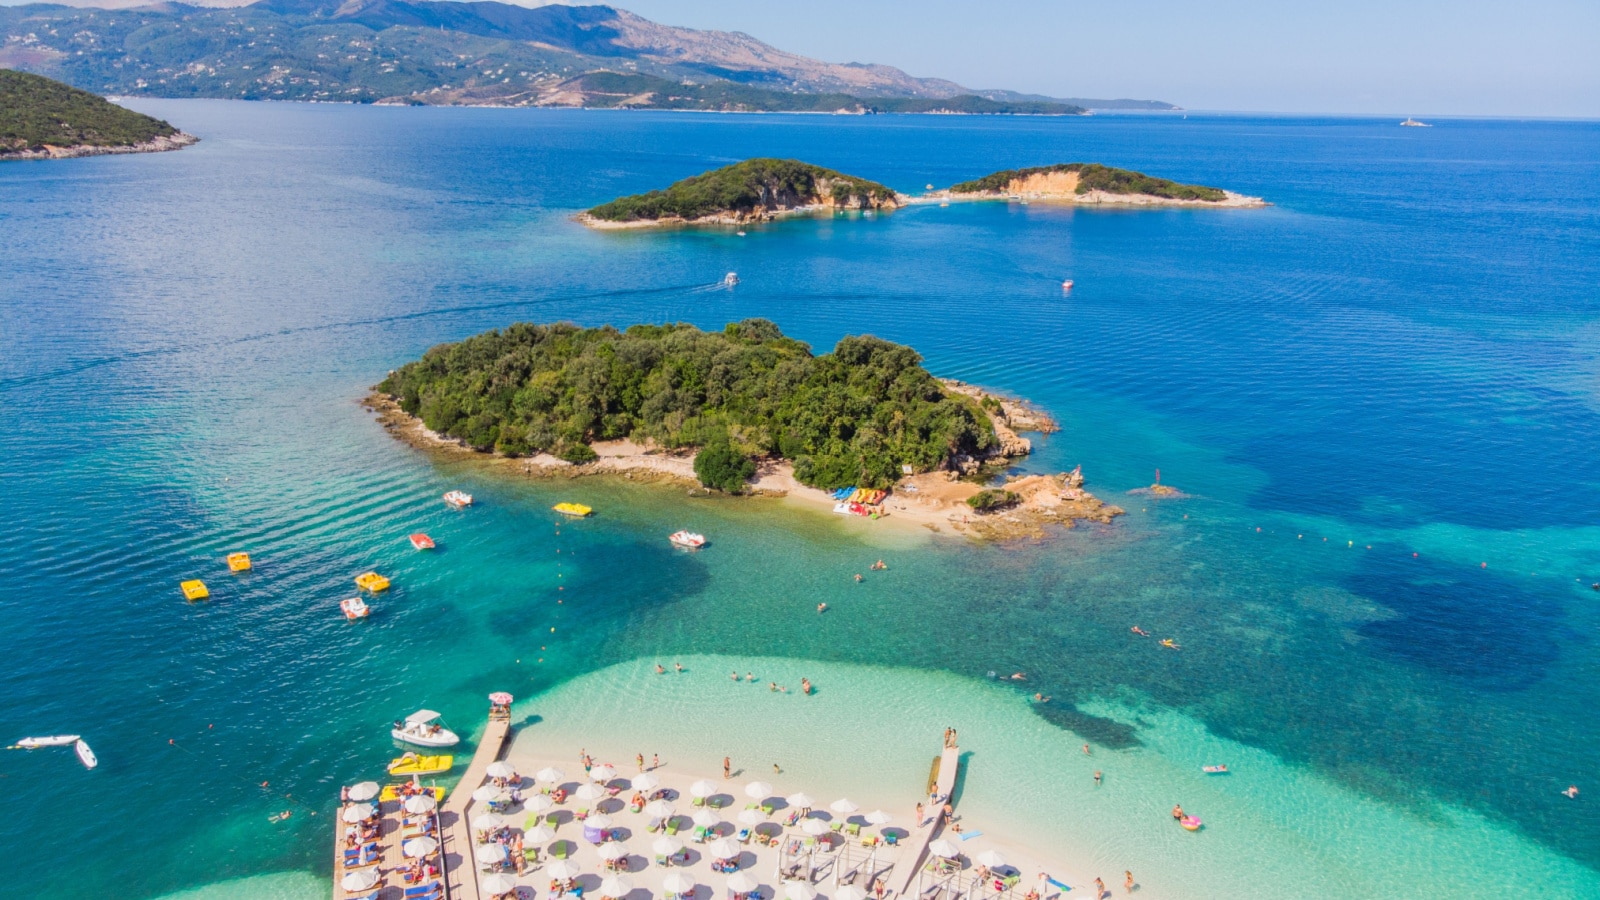 Aero Photography. View from a flying drone. Panoramic view of Ksamil, Albanian Riviera. Ksamil islands are located near the Saranda. Top View. Beautiful destinations